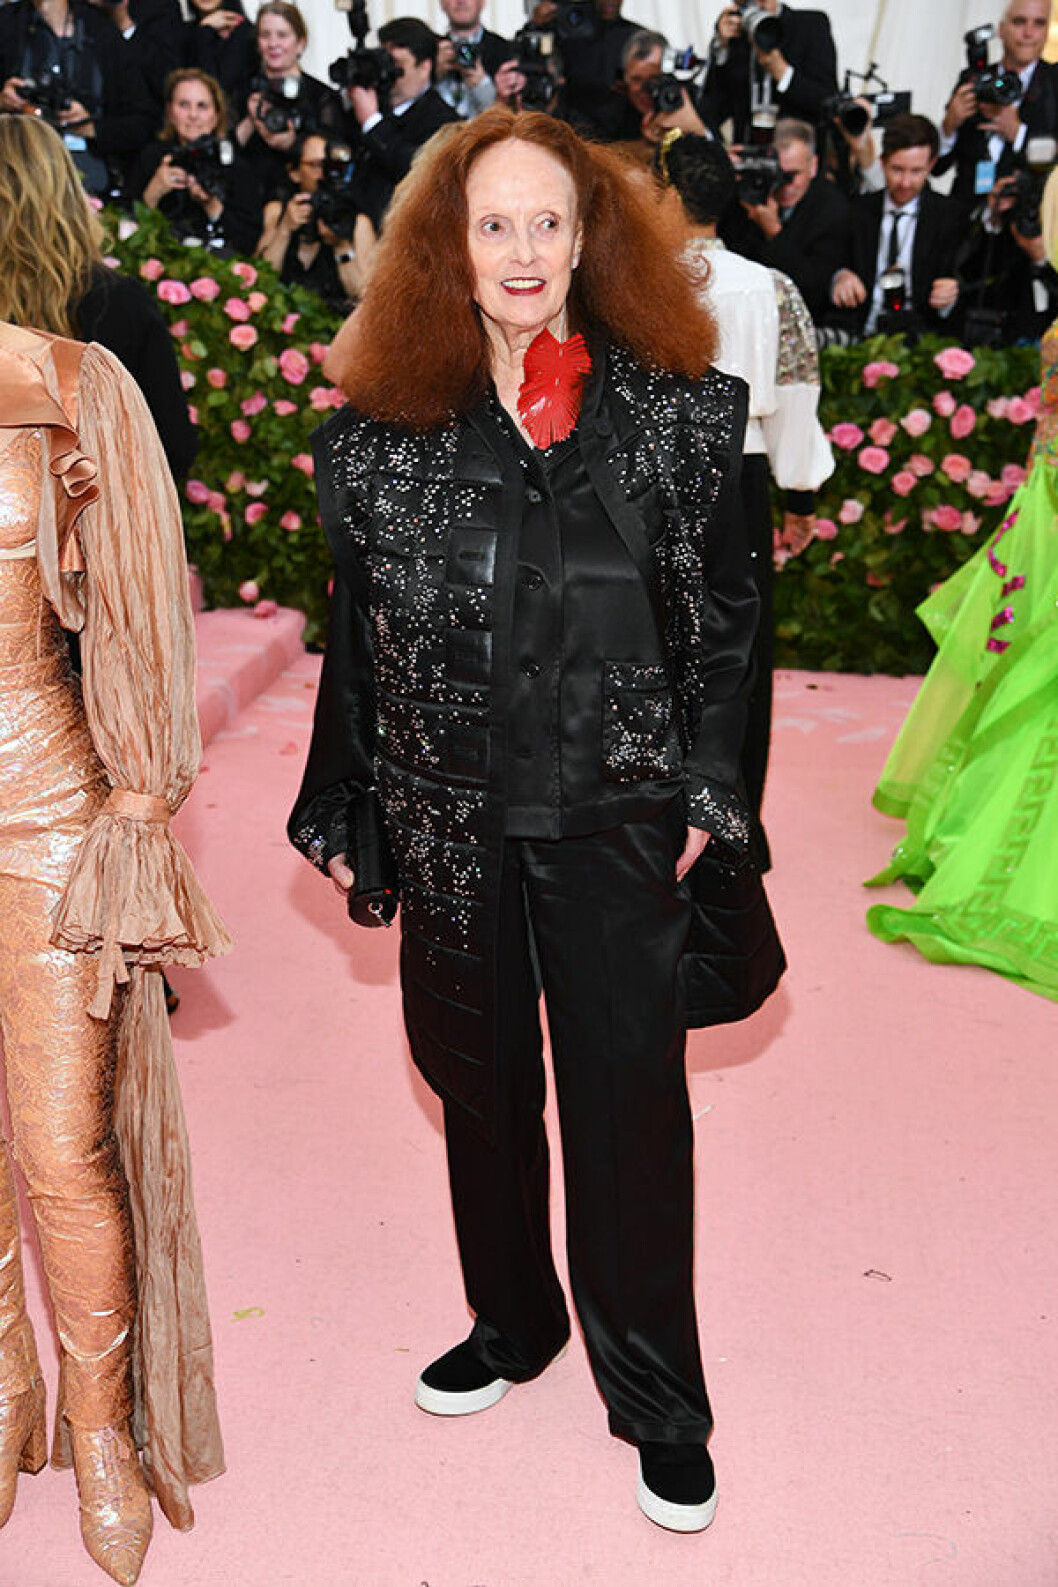 NEW YORK, NEW YORK &#8211; MAY 06: Grace Coddington attends The 2019 Met Gala Celebrating Camp: Notes on Fashion at Metropolitan Museum of Art on May 06, 2019 in New York City. (Photo by Dimitrios Kambouris/Getty Images for The Met Museum/Vogue)